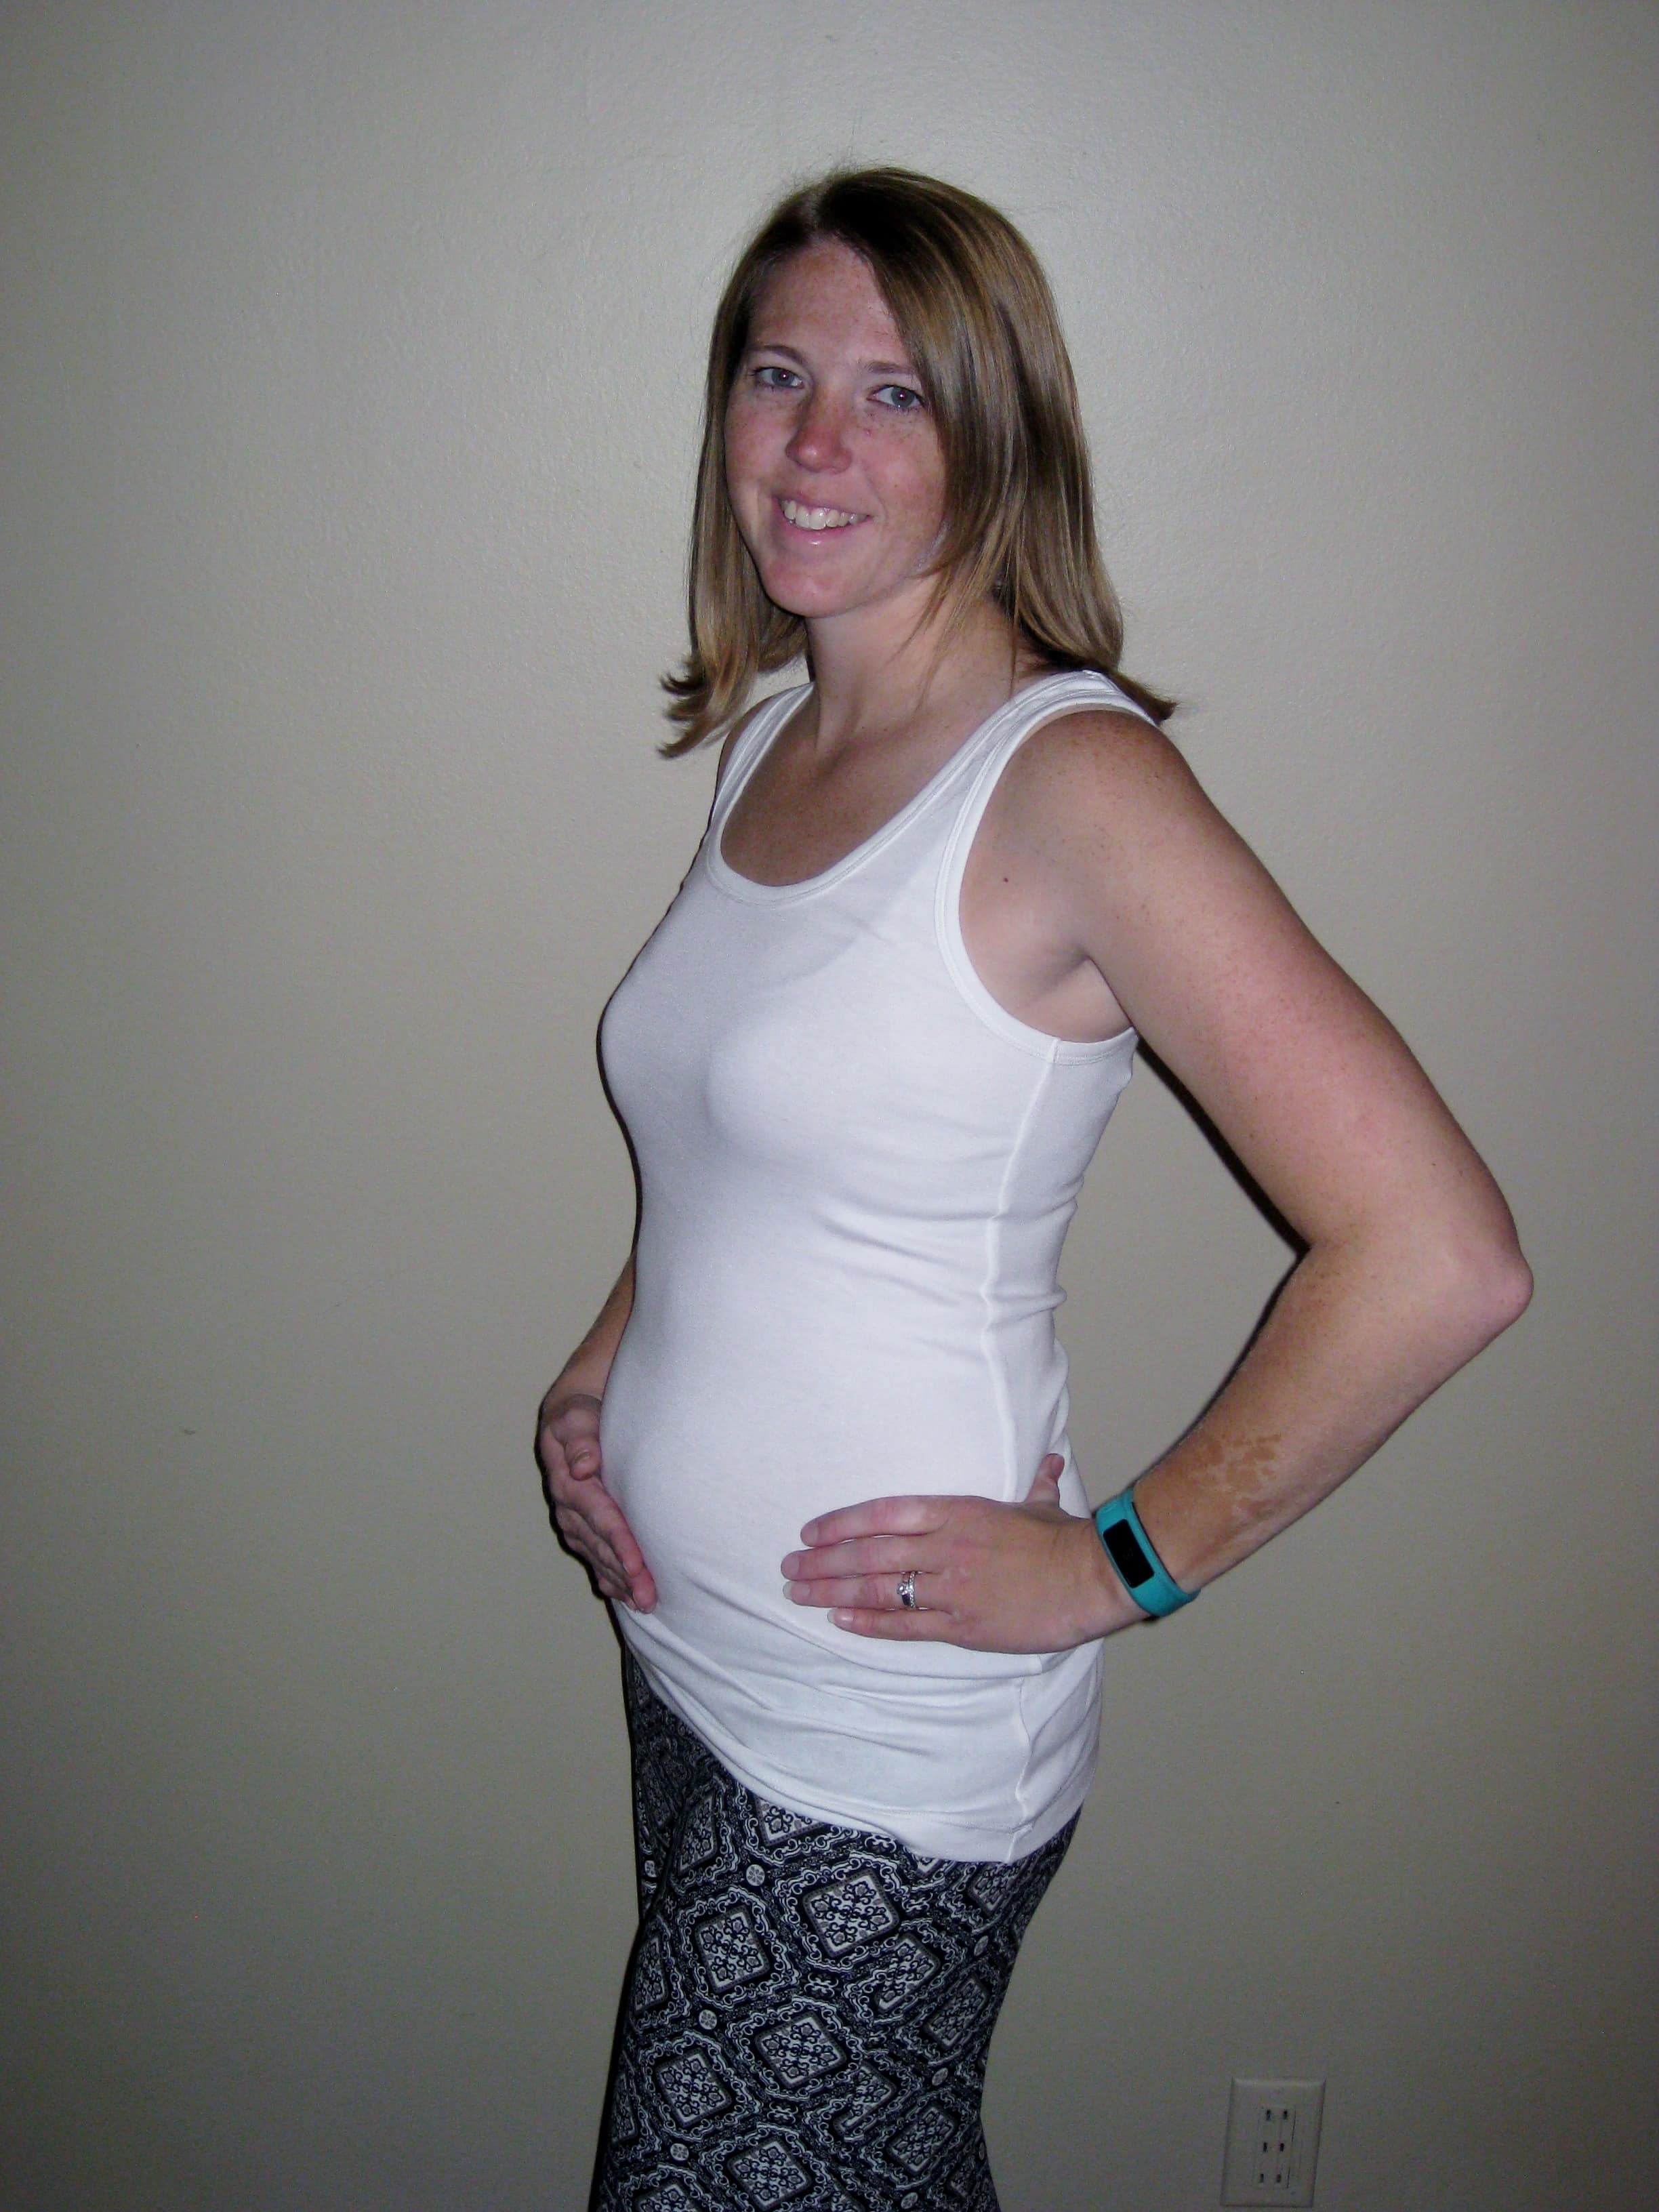 12 Weeks Pregnant with Twins